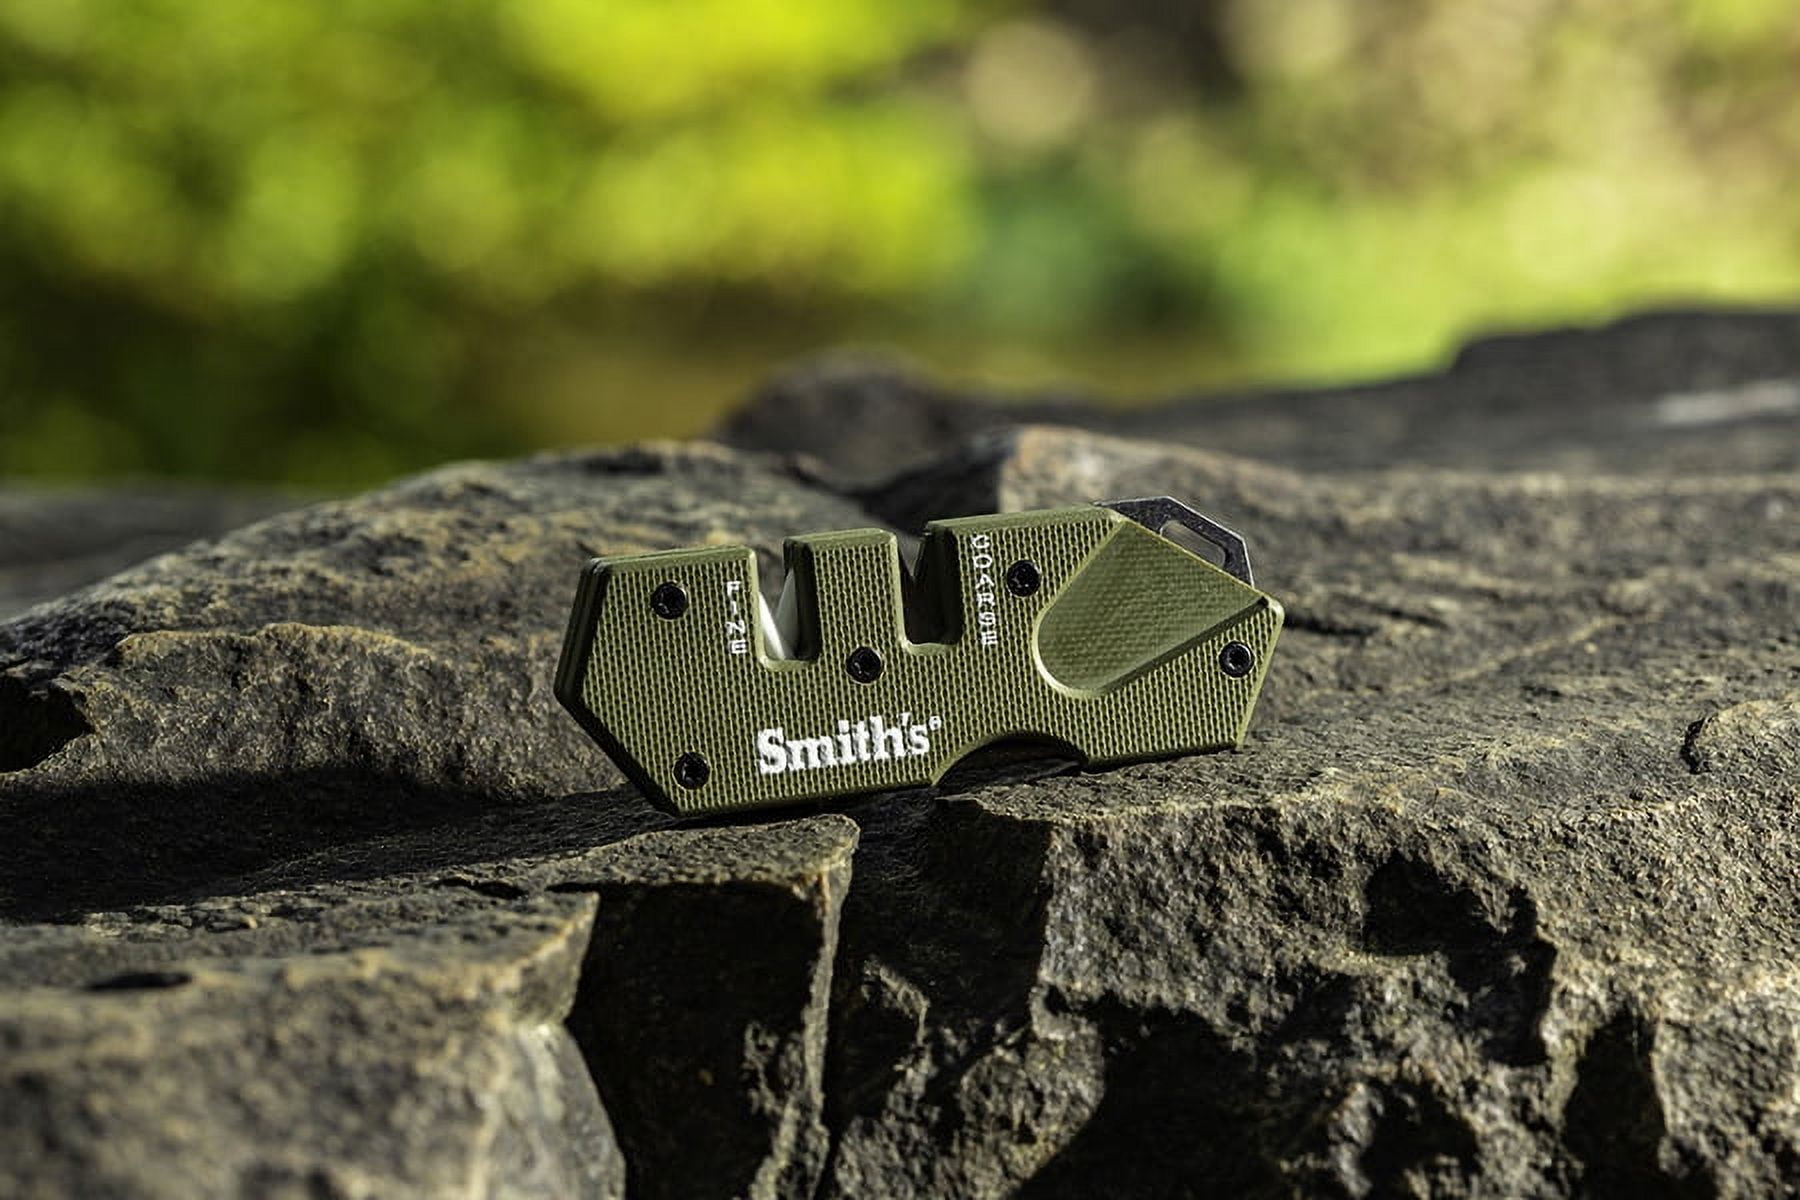 Smith's - PP1 Tactical Knife Sharpener - OD Green - 50981 best price, check availability, buy online with